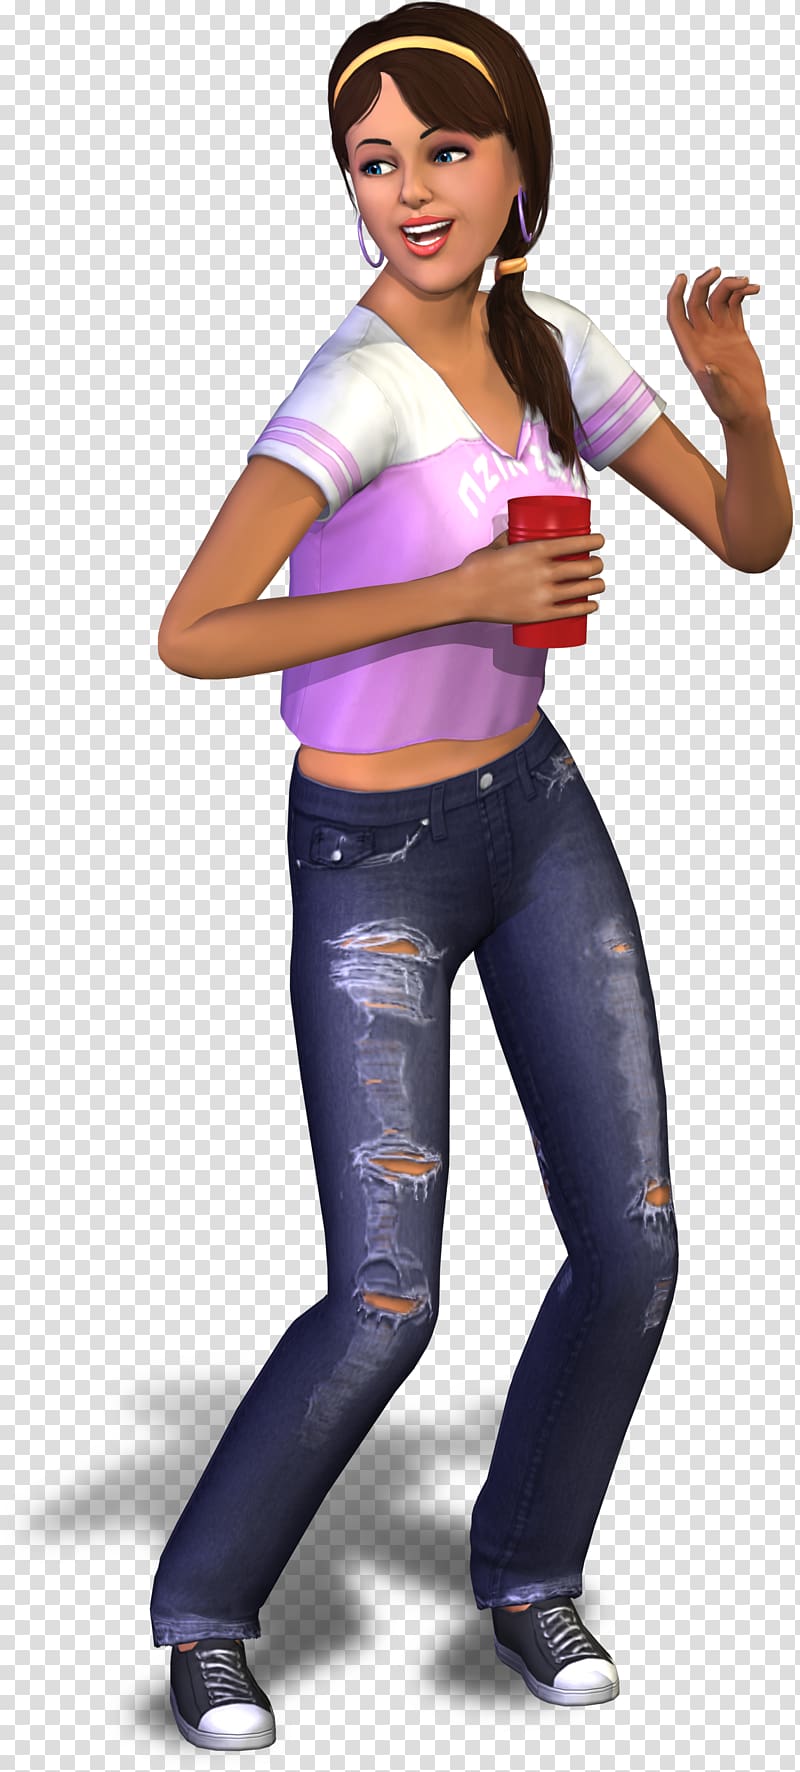 The Sims 3: University Life The Sims 2: University The Sims 2: Apartment Life The Sims 2: Nightlife The Sims 3: Seasons, workplace characters transparent background PNG clipart